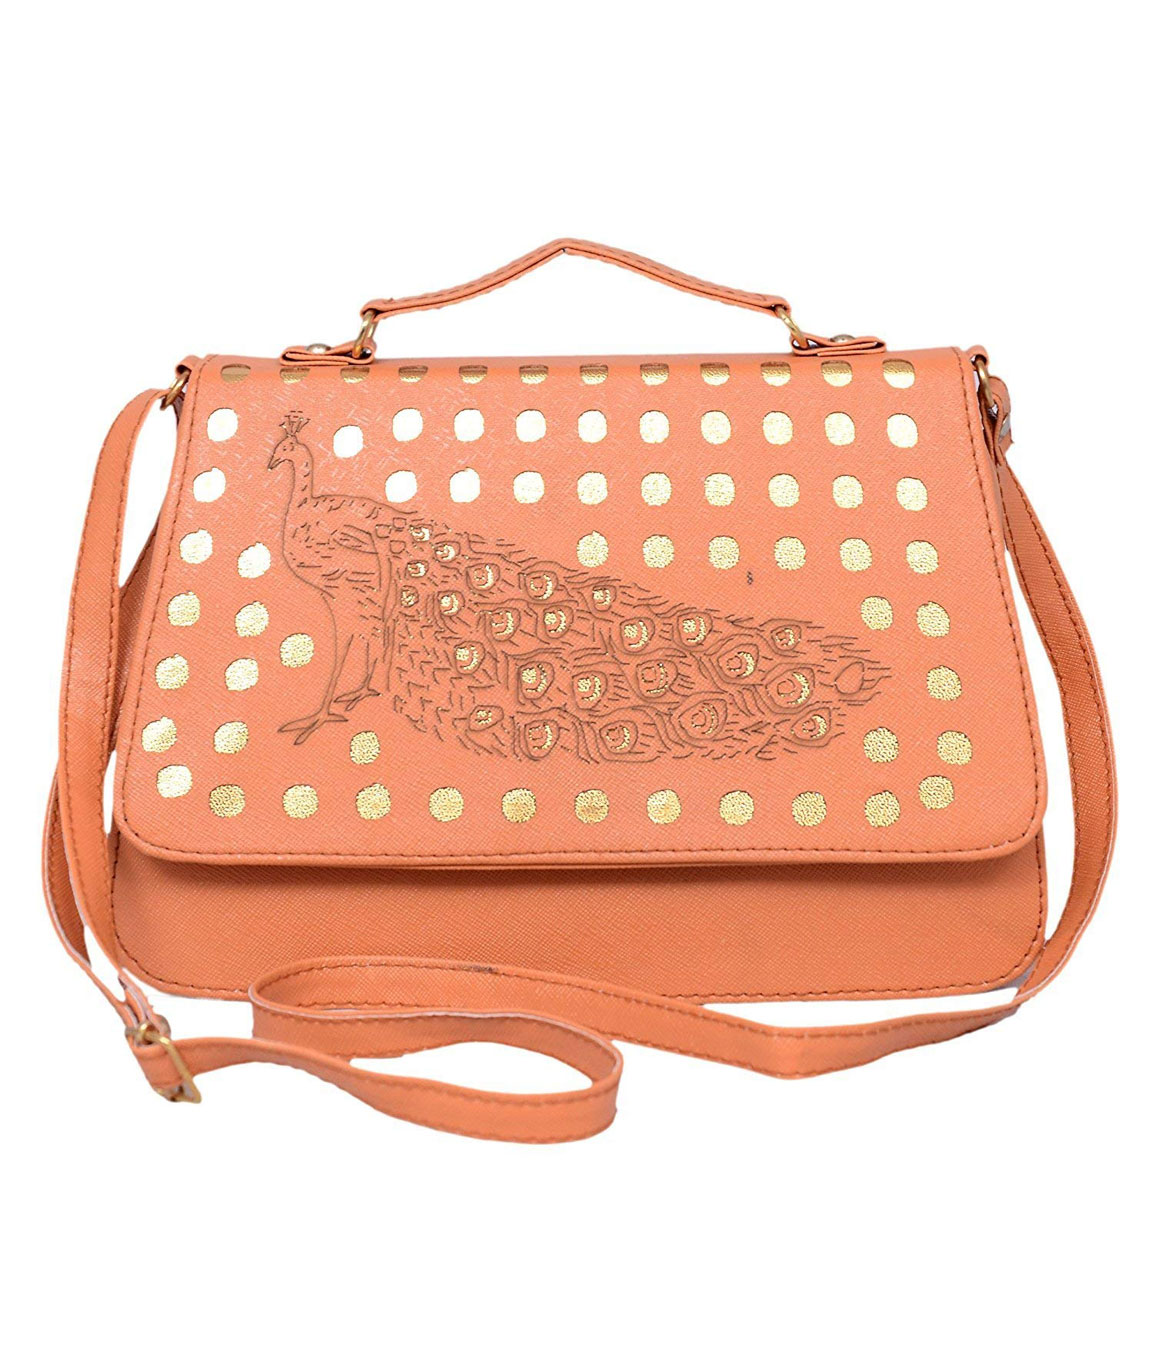 Bhawana purse centre Sling bag with fancy cutting Best Quality limited Offer